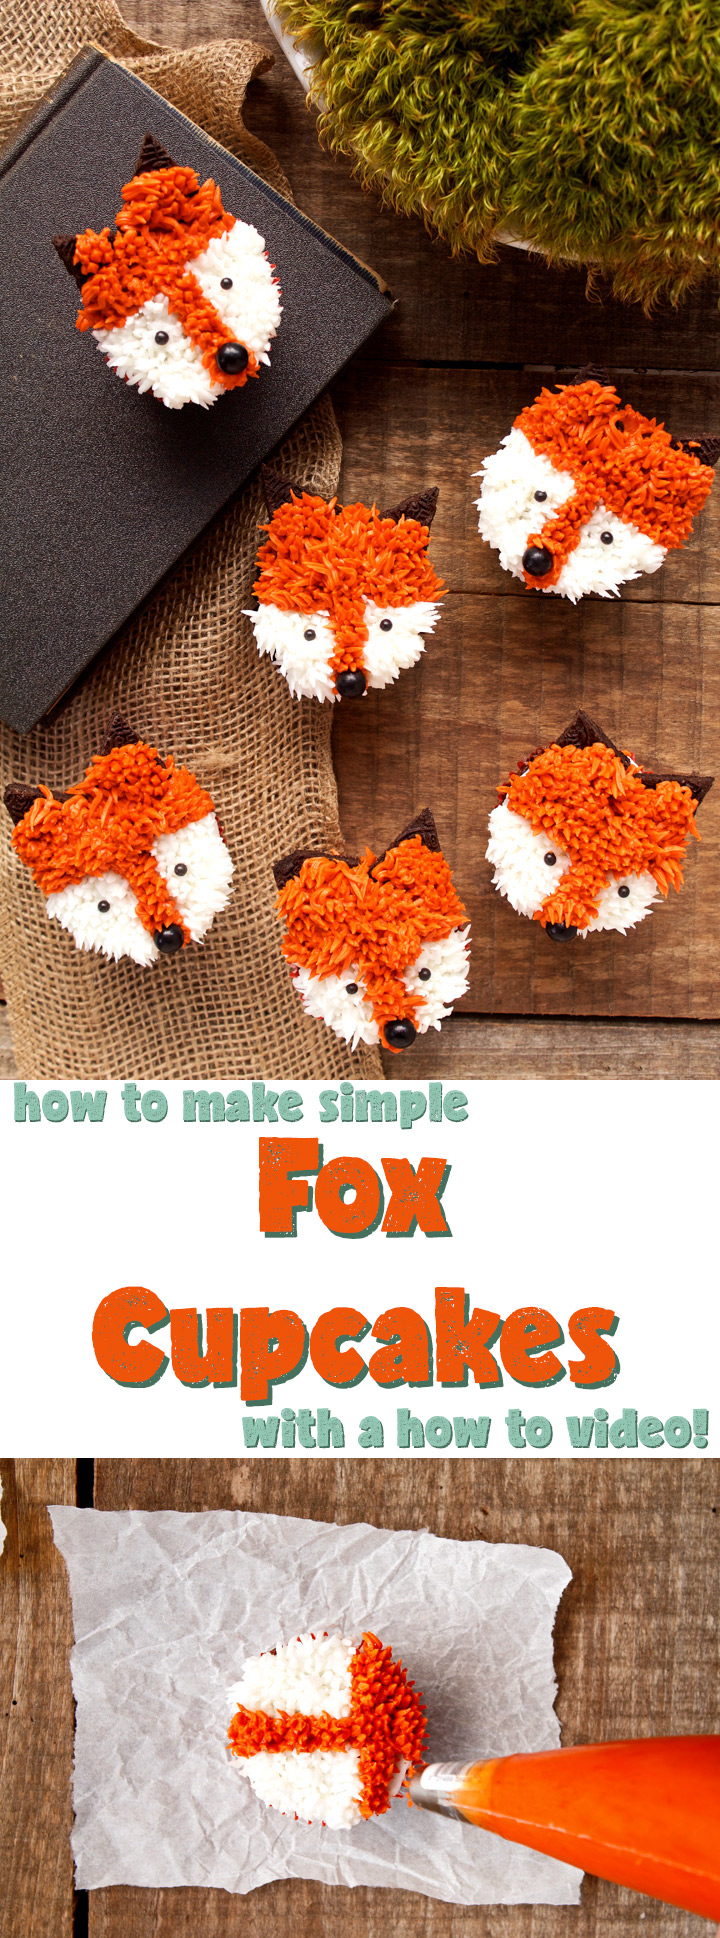 how-to-make-simple-little-fox-cupcakes-with-an-easy-to-follow-how-to-video-the-bearfoot-baker